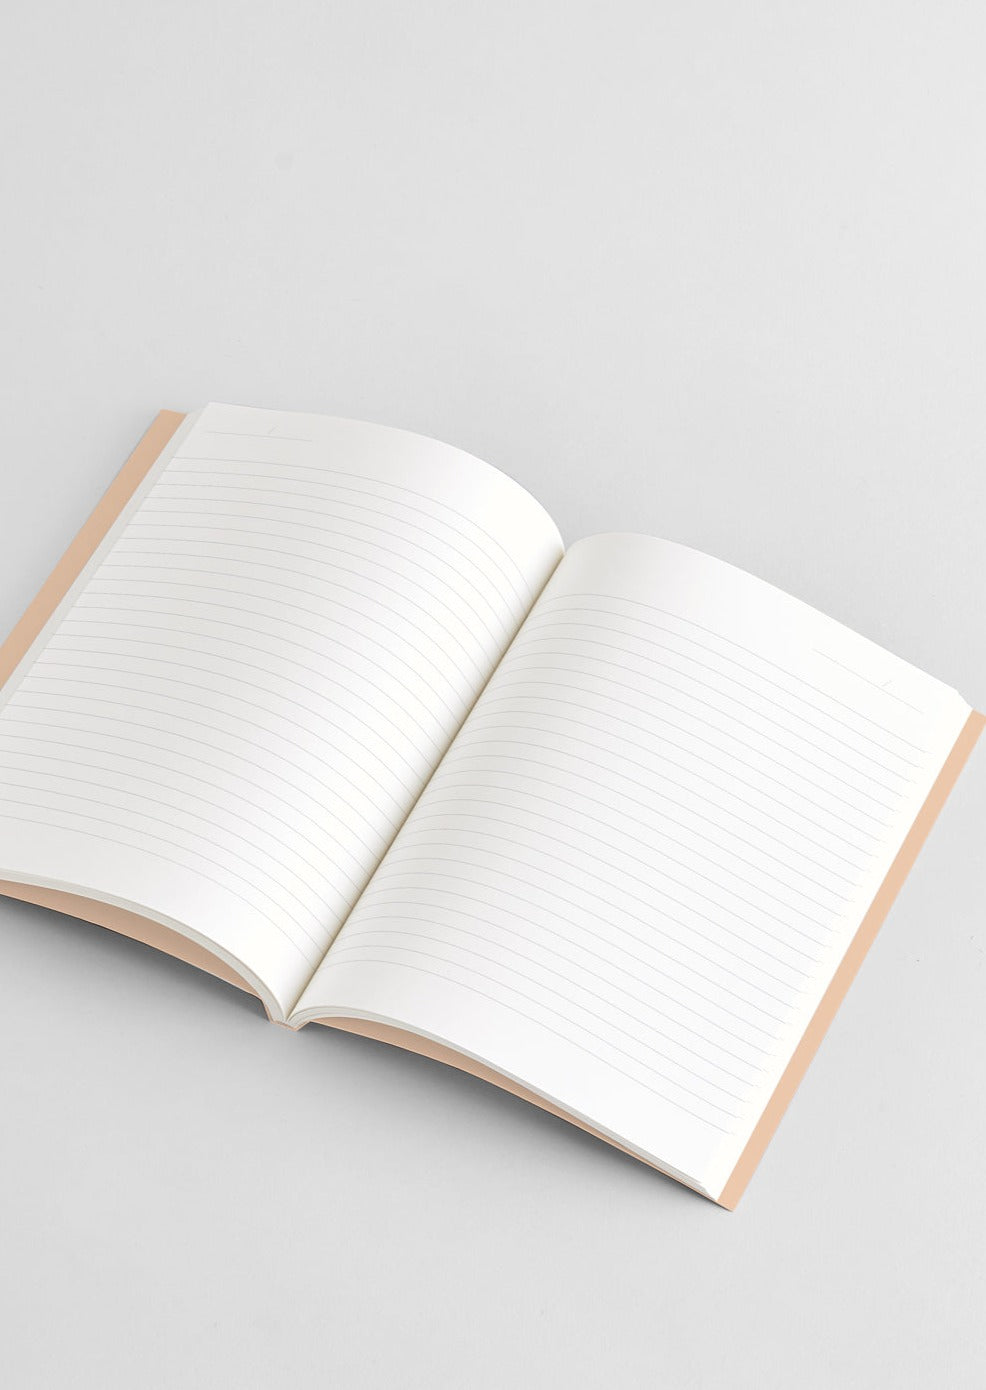 Objects Notebook